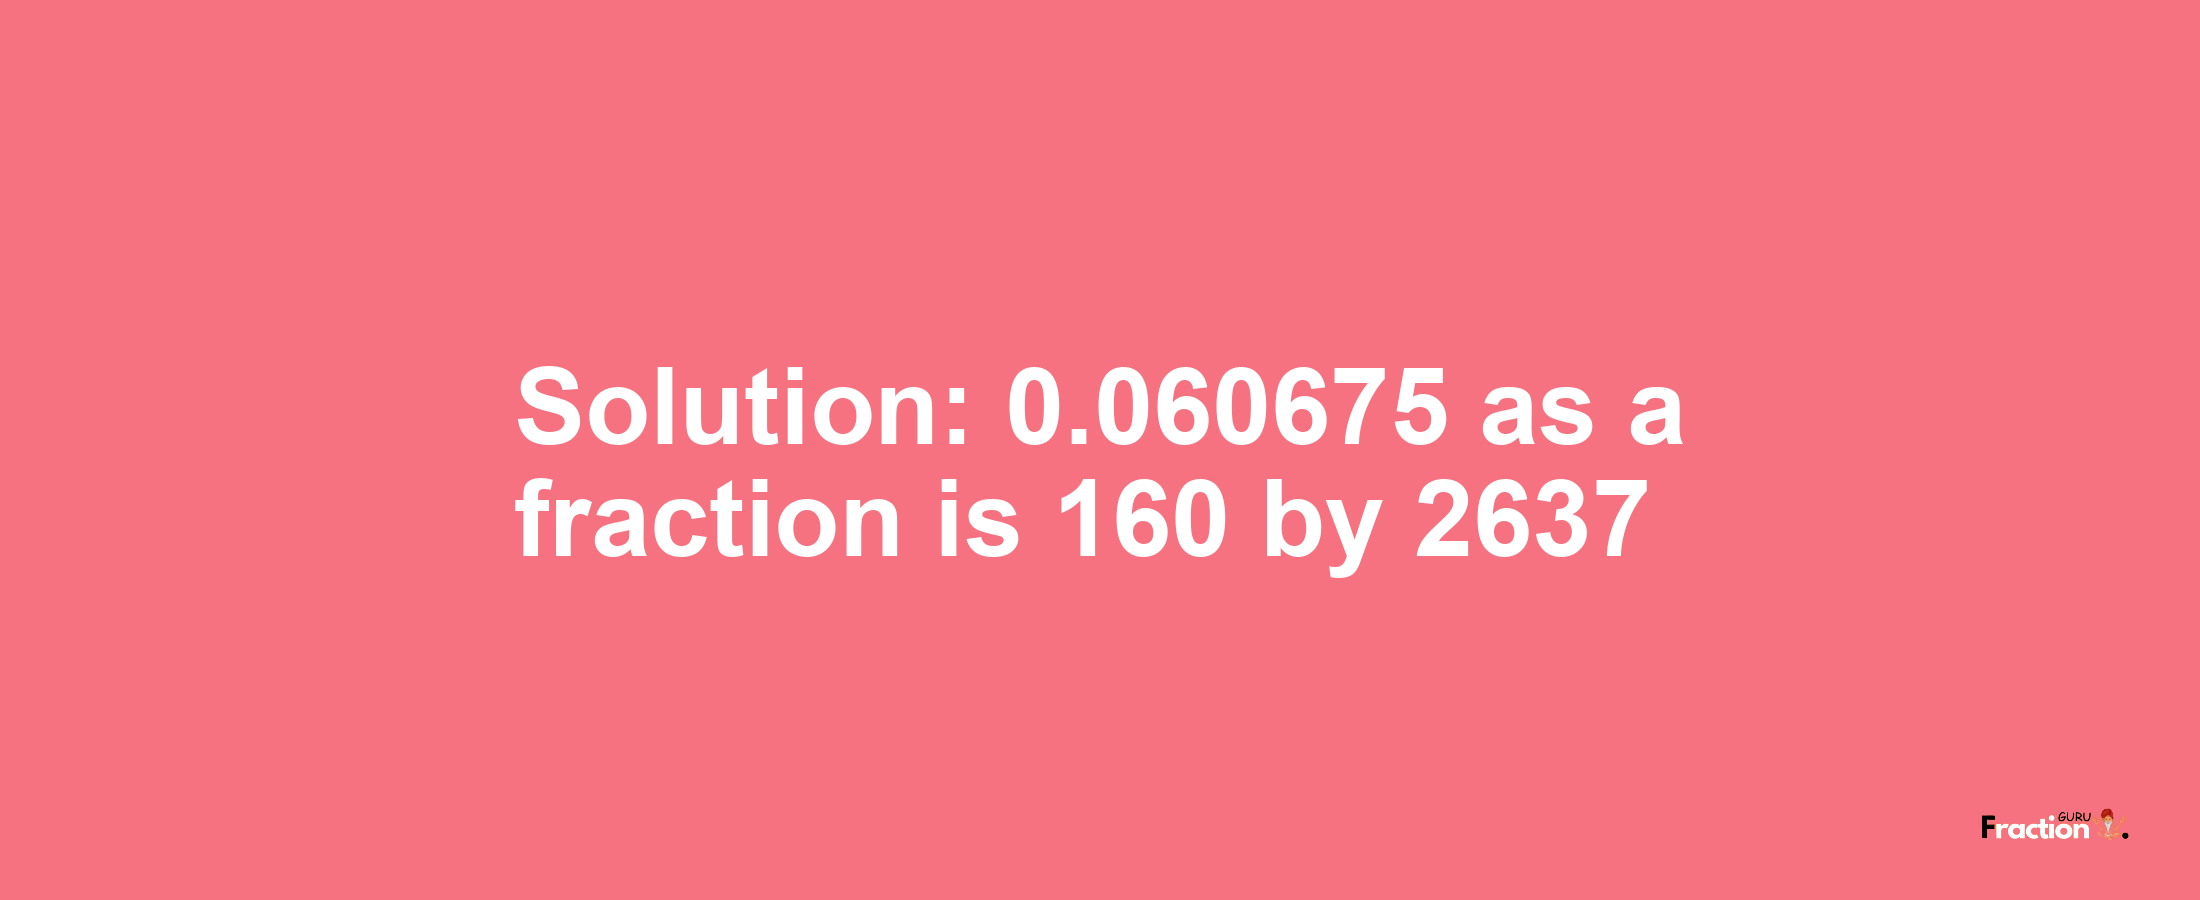 Solution:0.060675 as a fraction is 160/2637